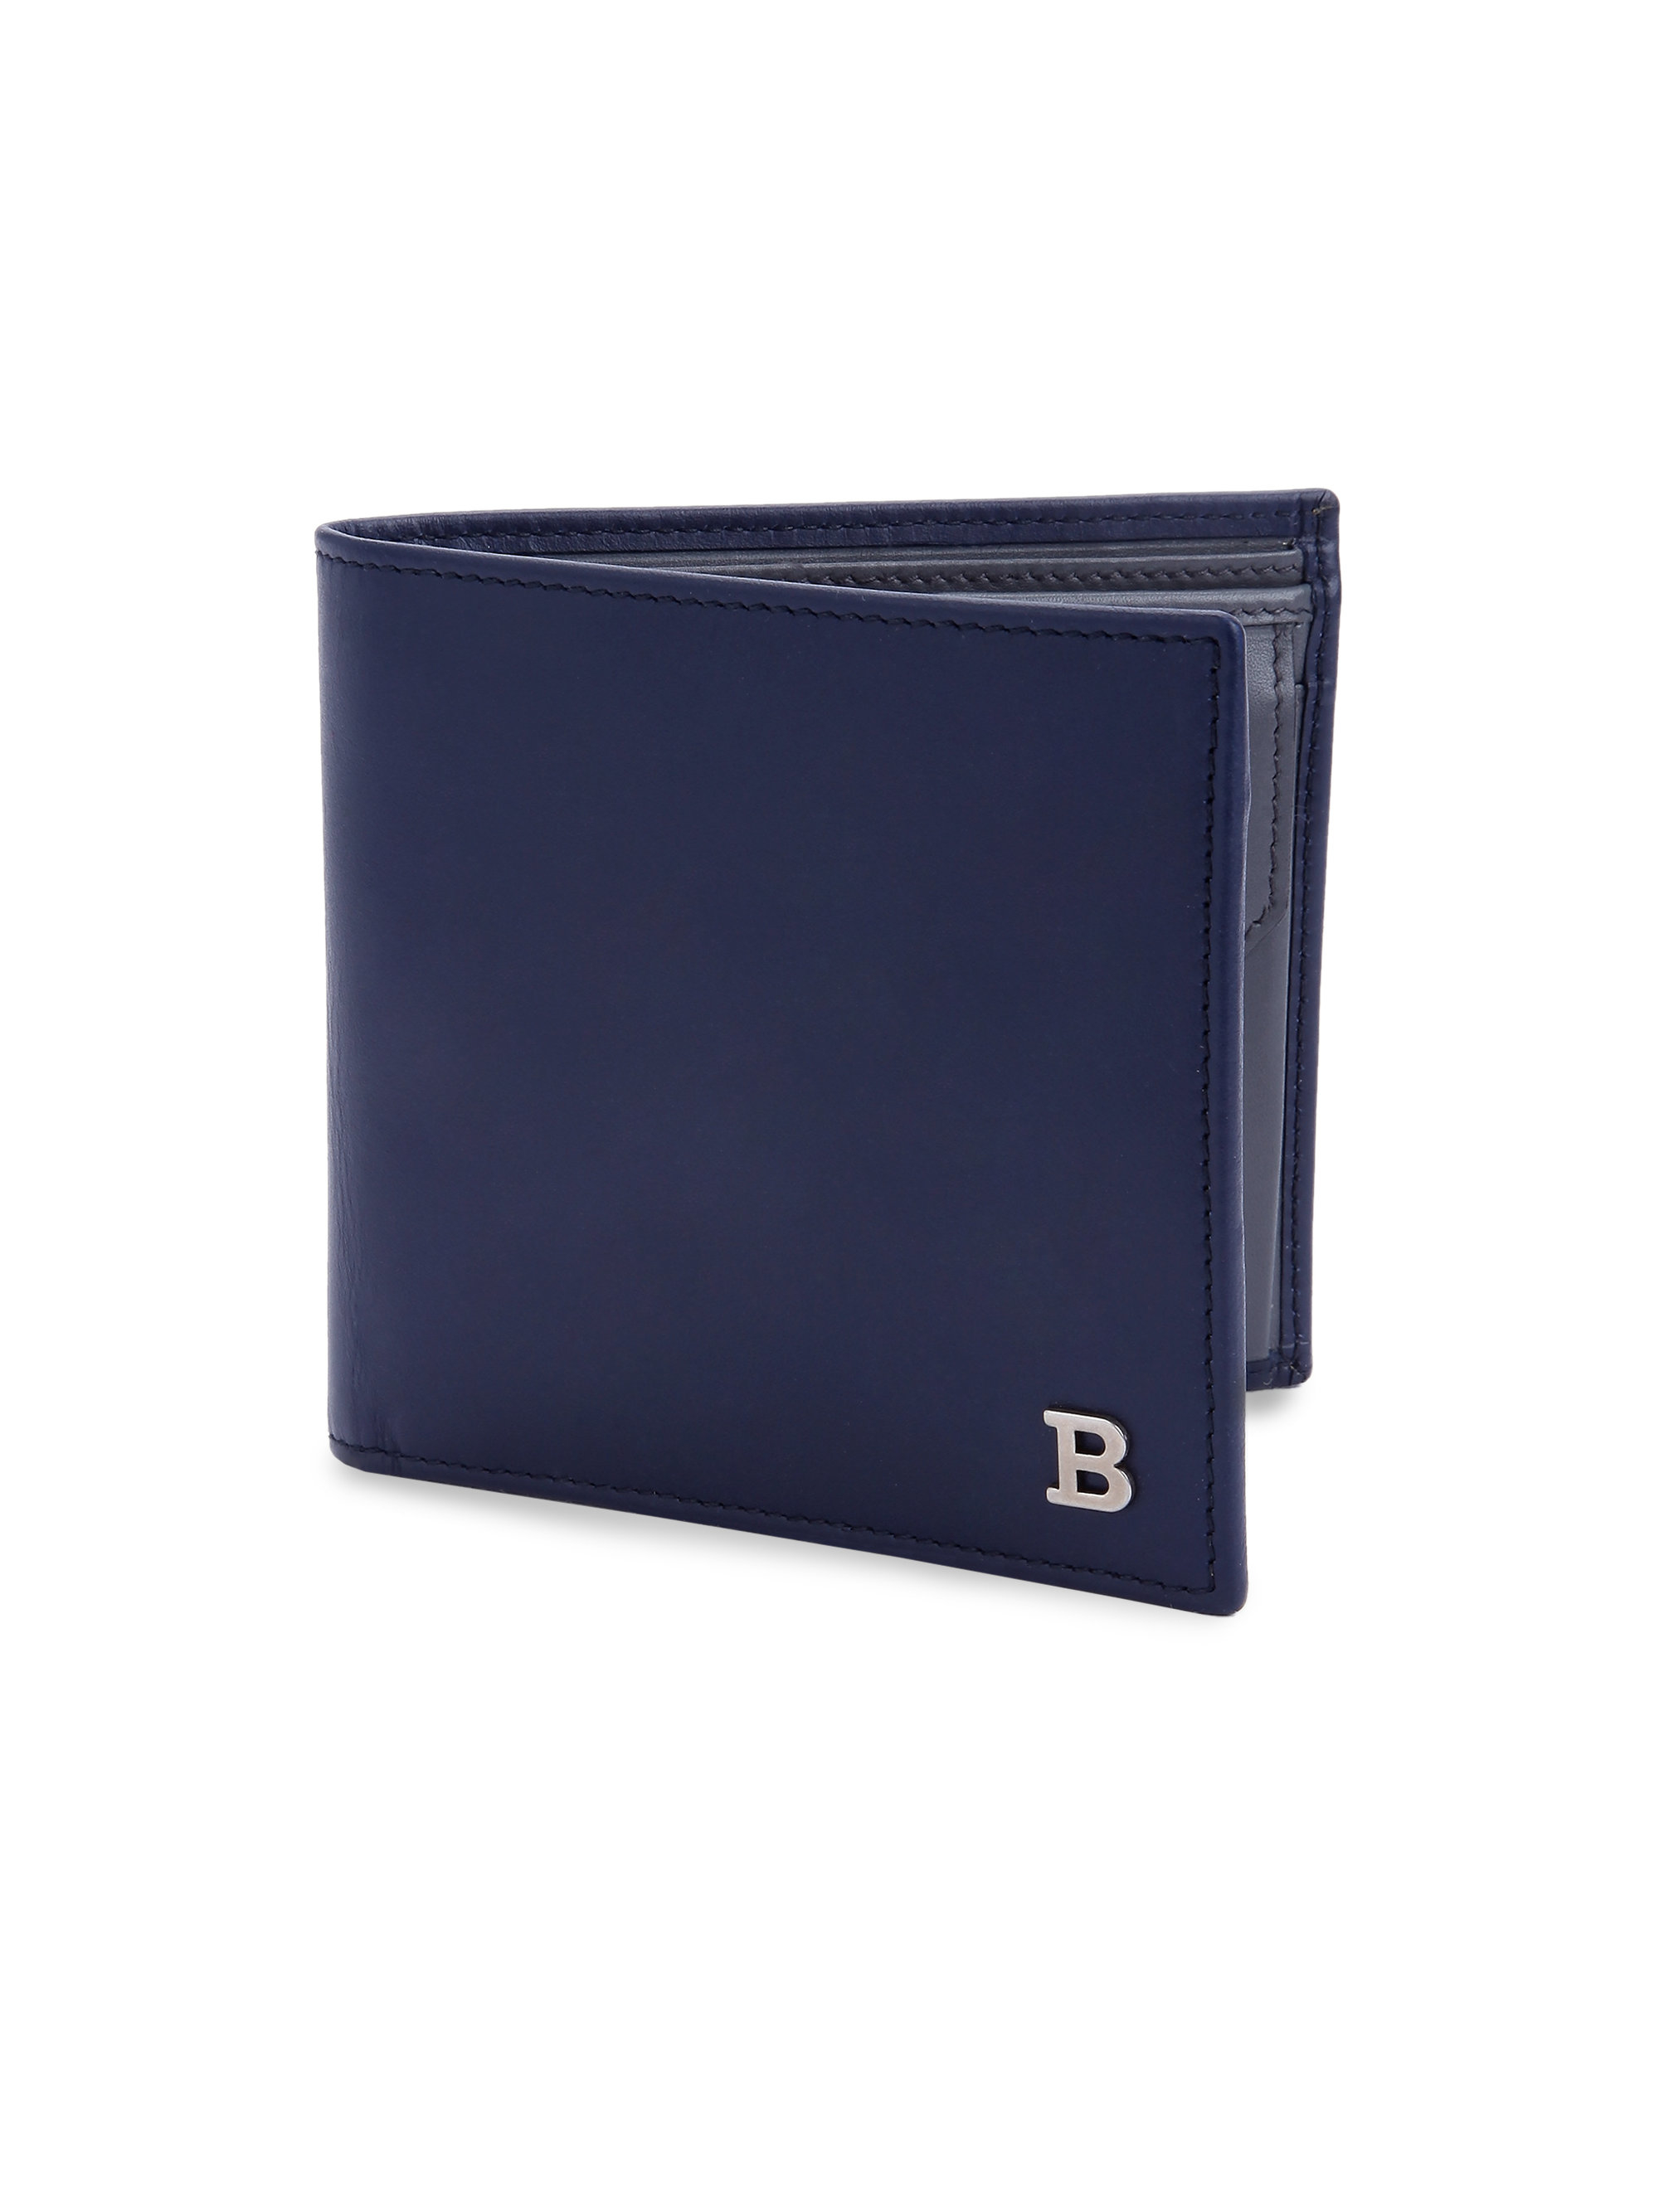 Bally Wallets | IUCN Water